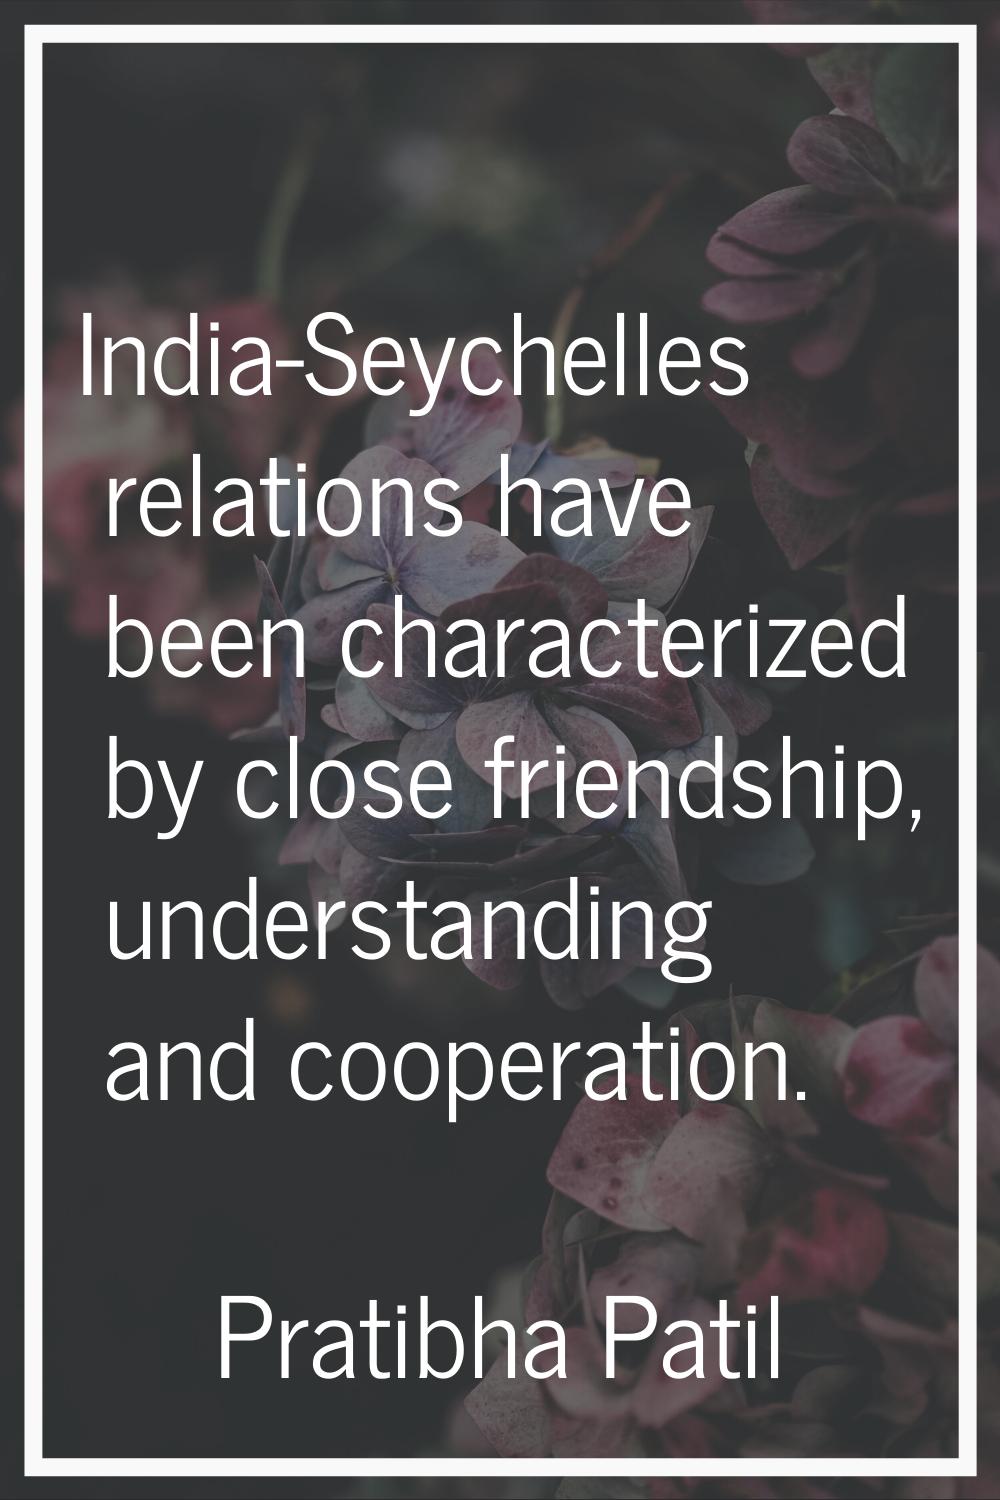 India-Seychelles relations have been characterized by close friendship, understanding and cooperati